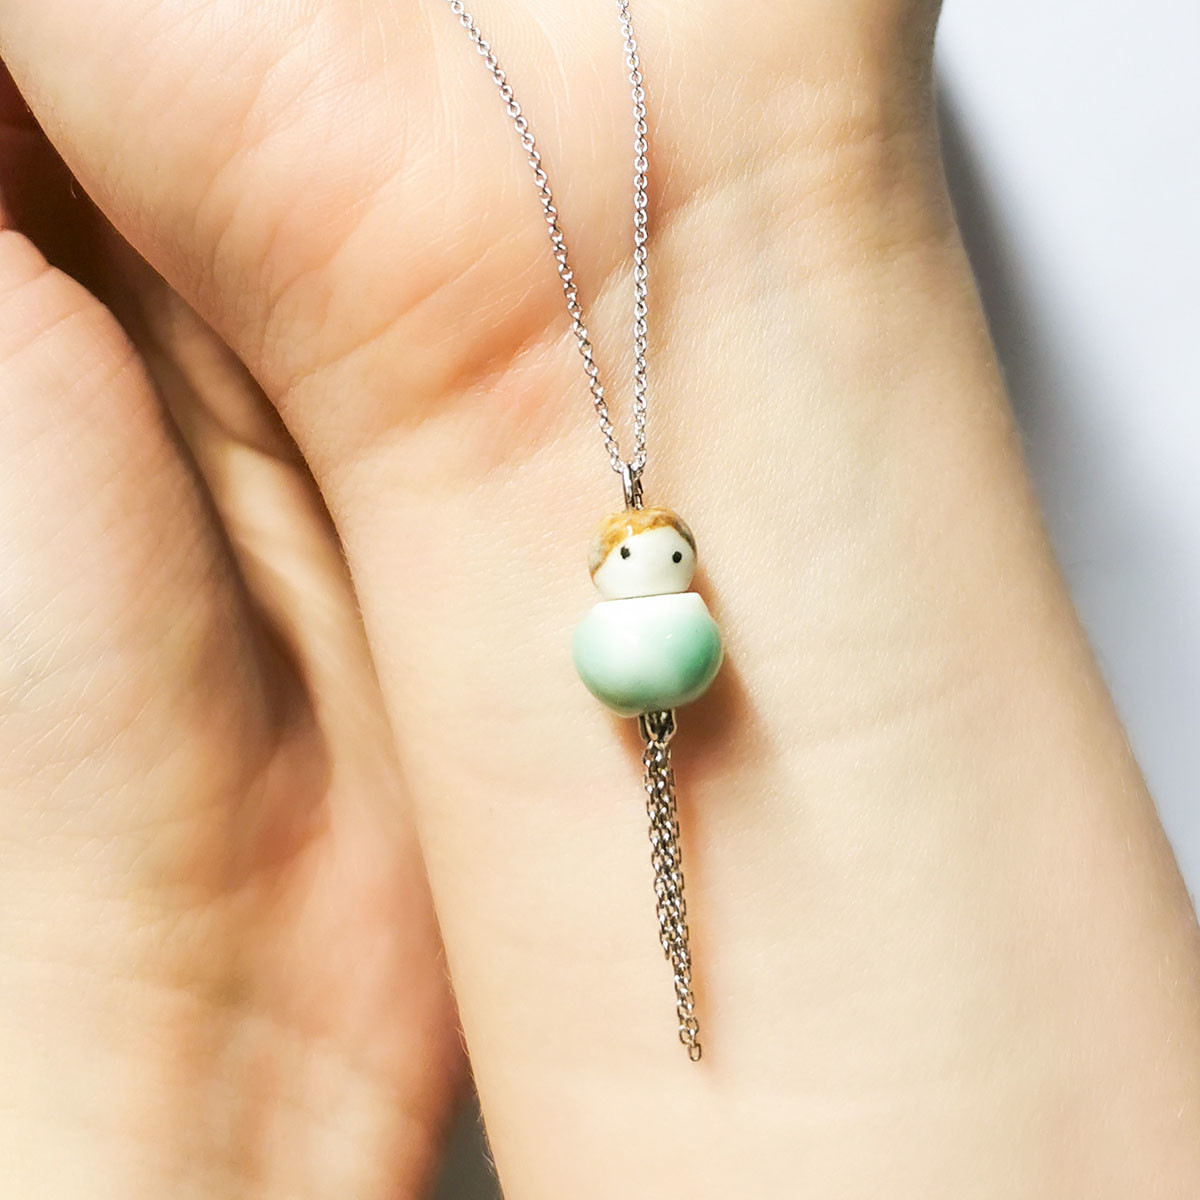 Little "Sweeties" – adorable necklaces for all occasions